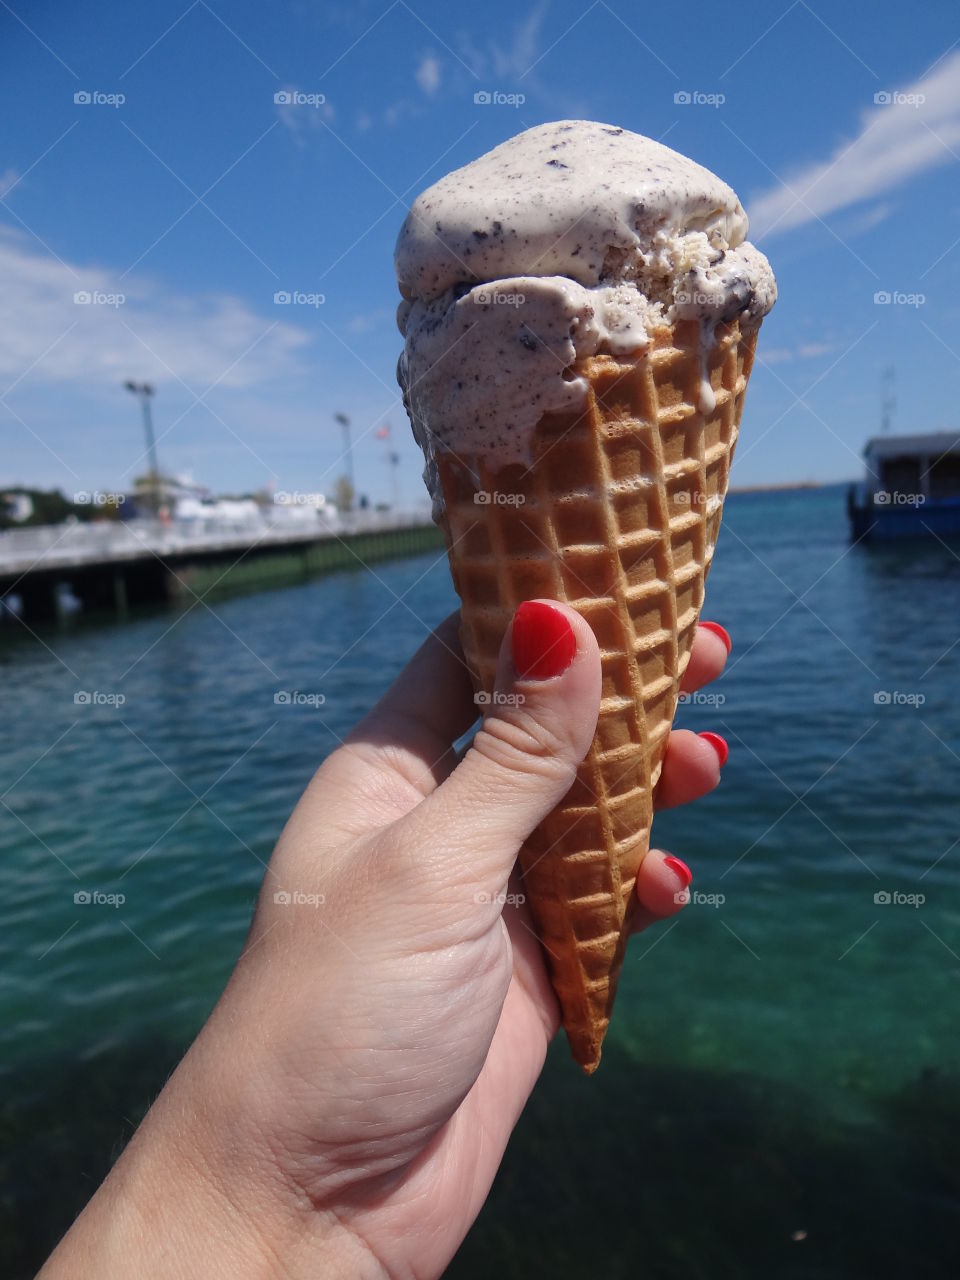 Hand holding ice cream. Feminine hand with manicure holding ice cream cone. Water in the background